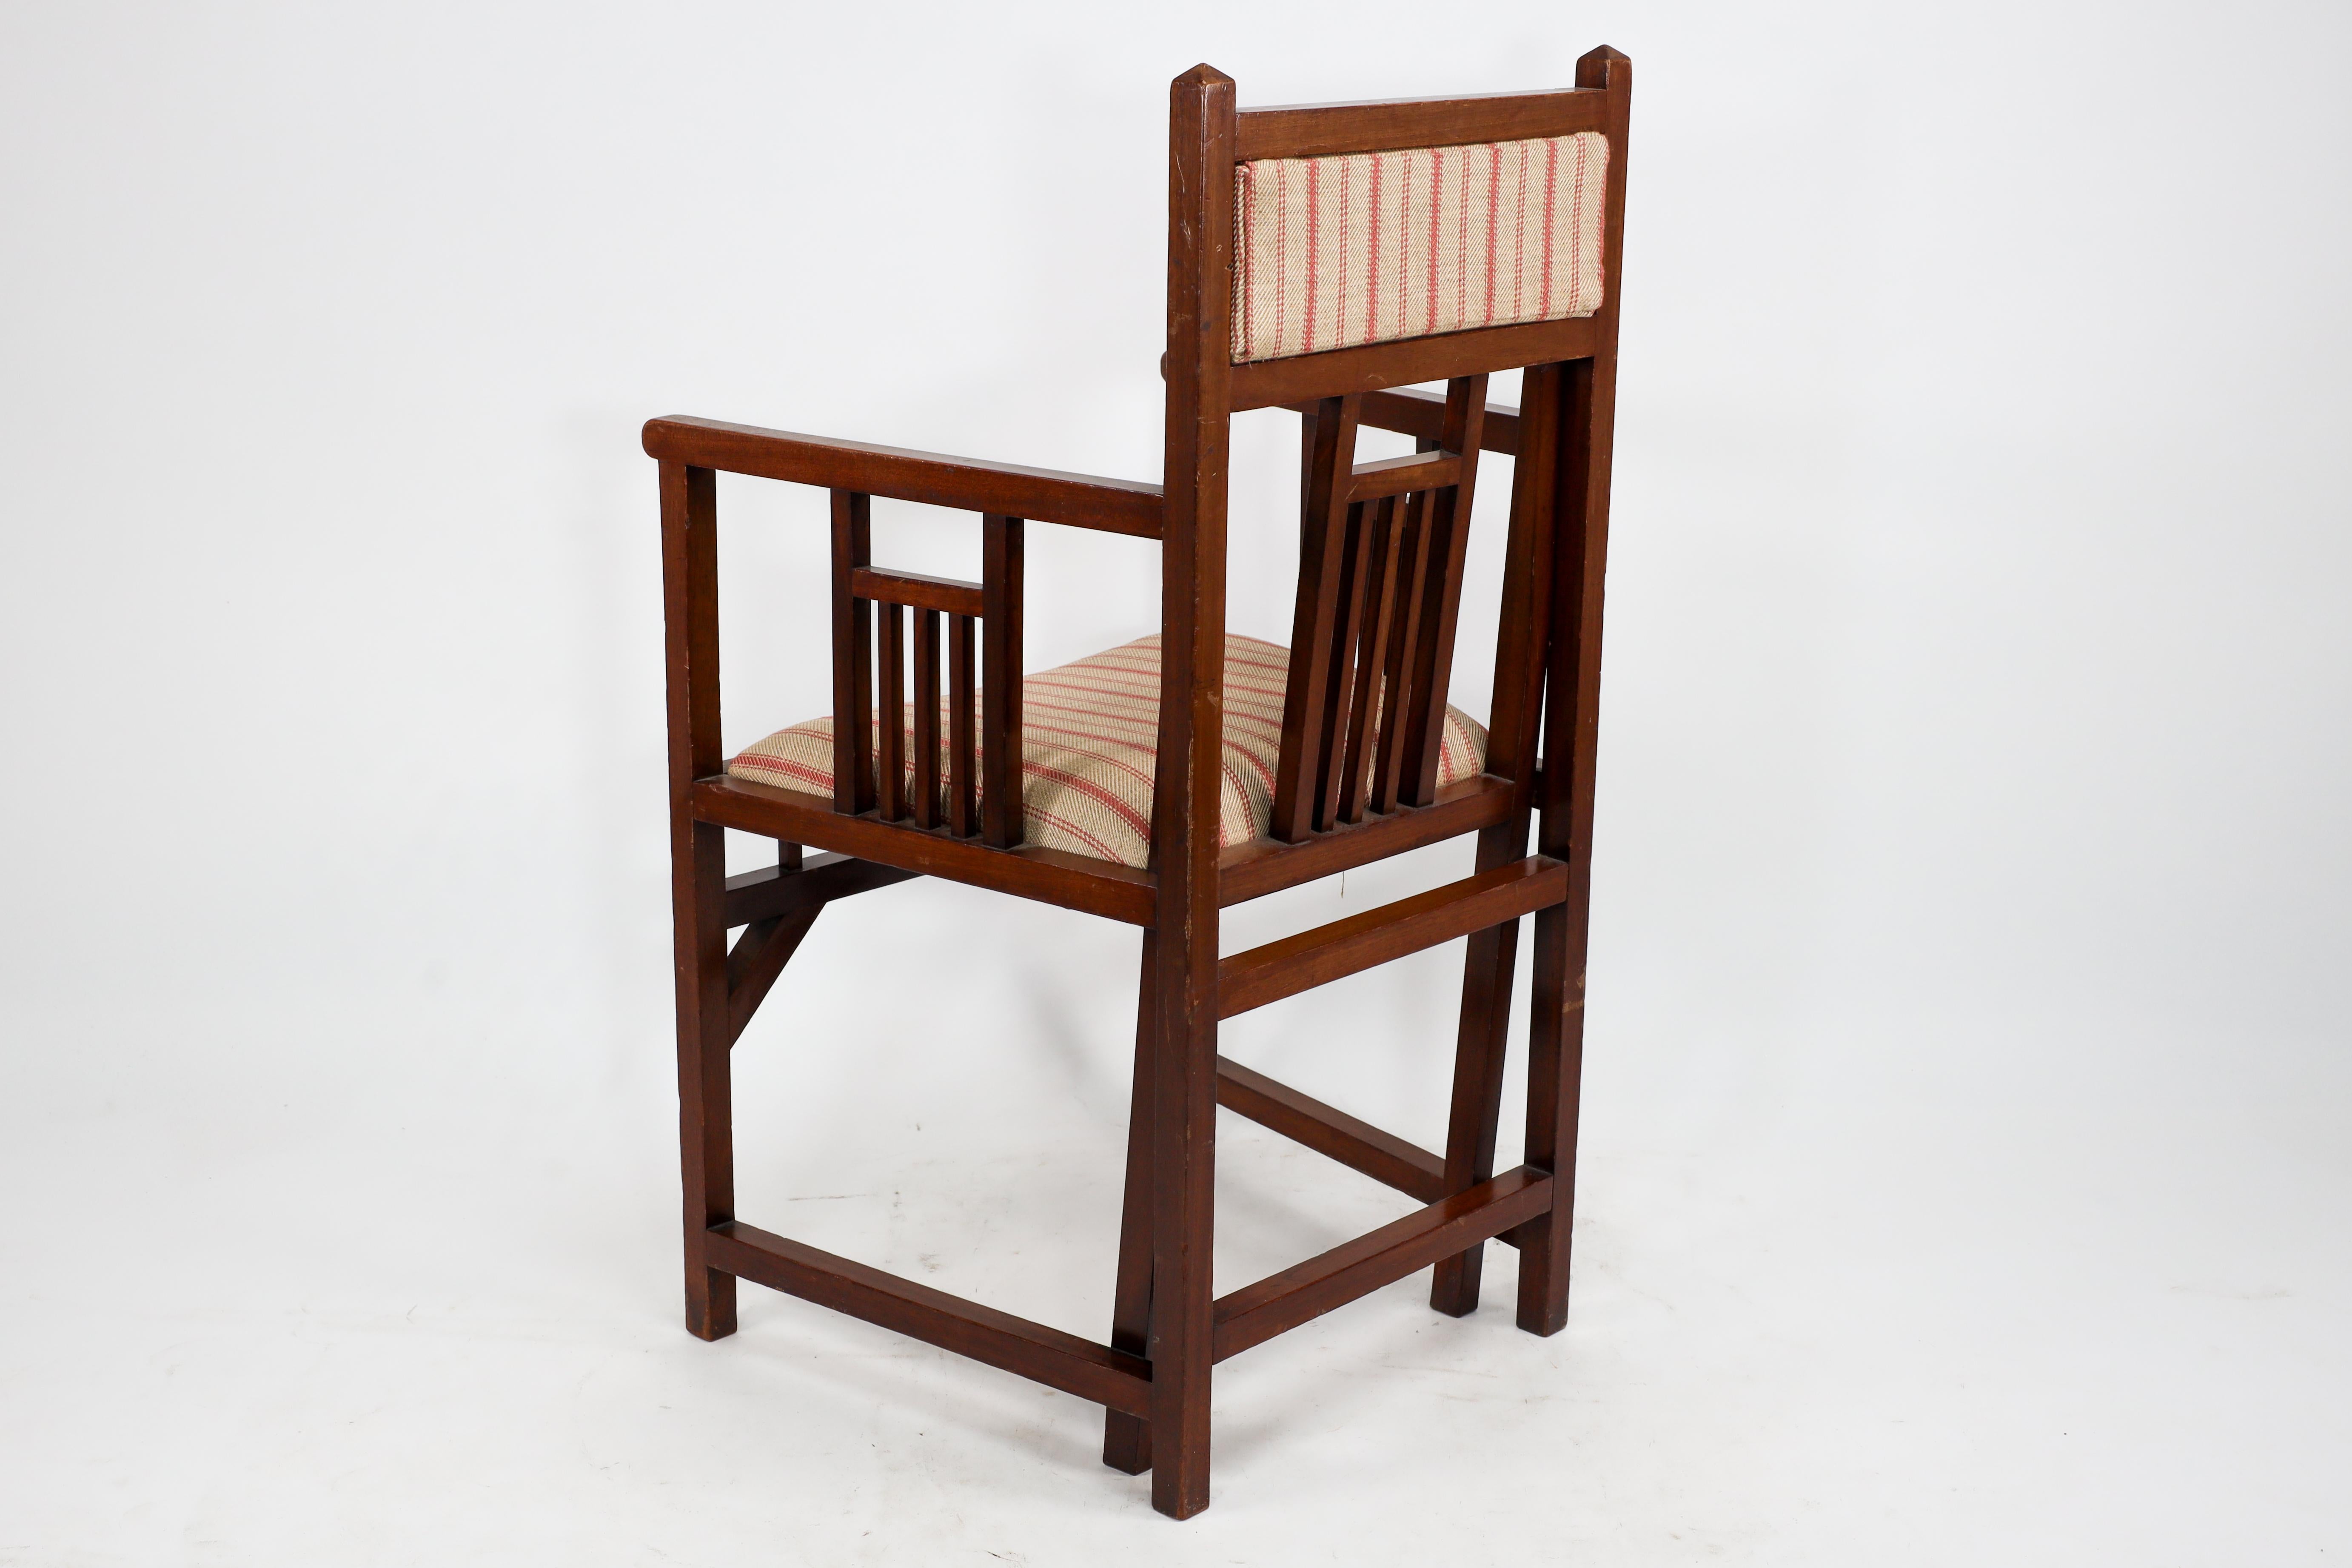 Early 20th Century Bombay Art Furniture An Anglo-Japanese Walnut armchair with a double back leg. For Sale